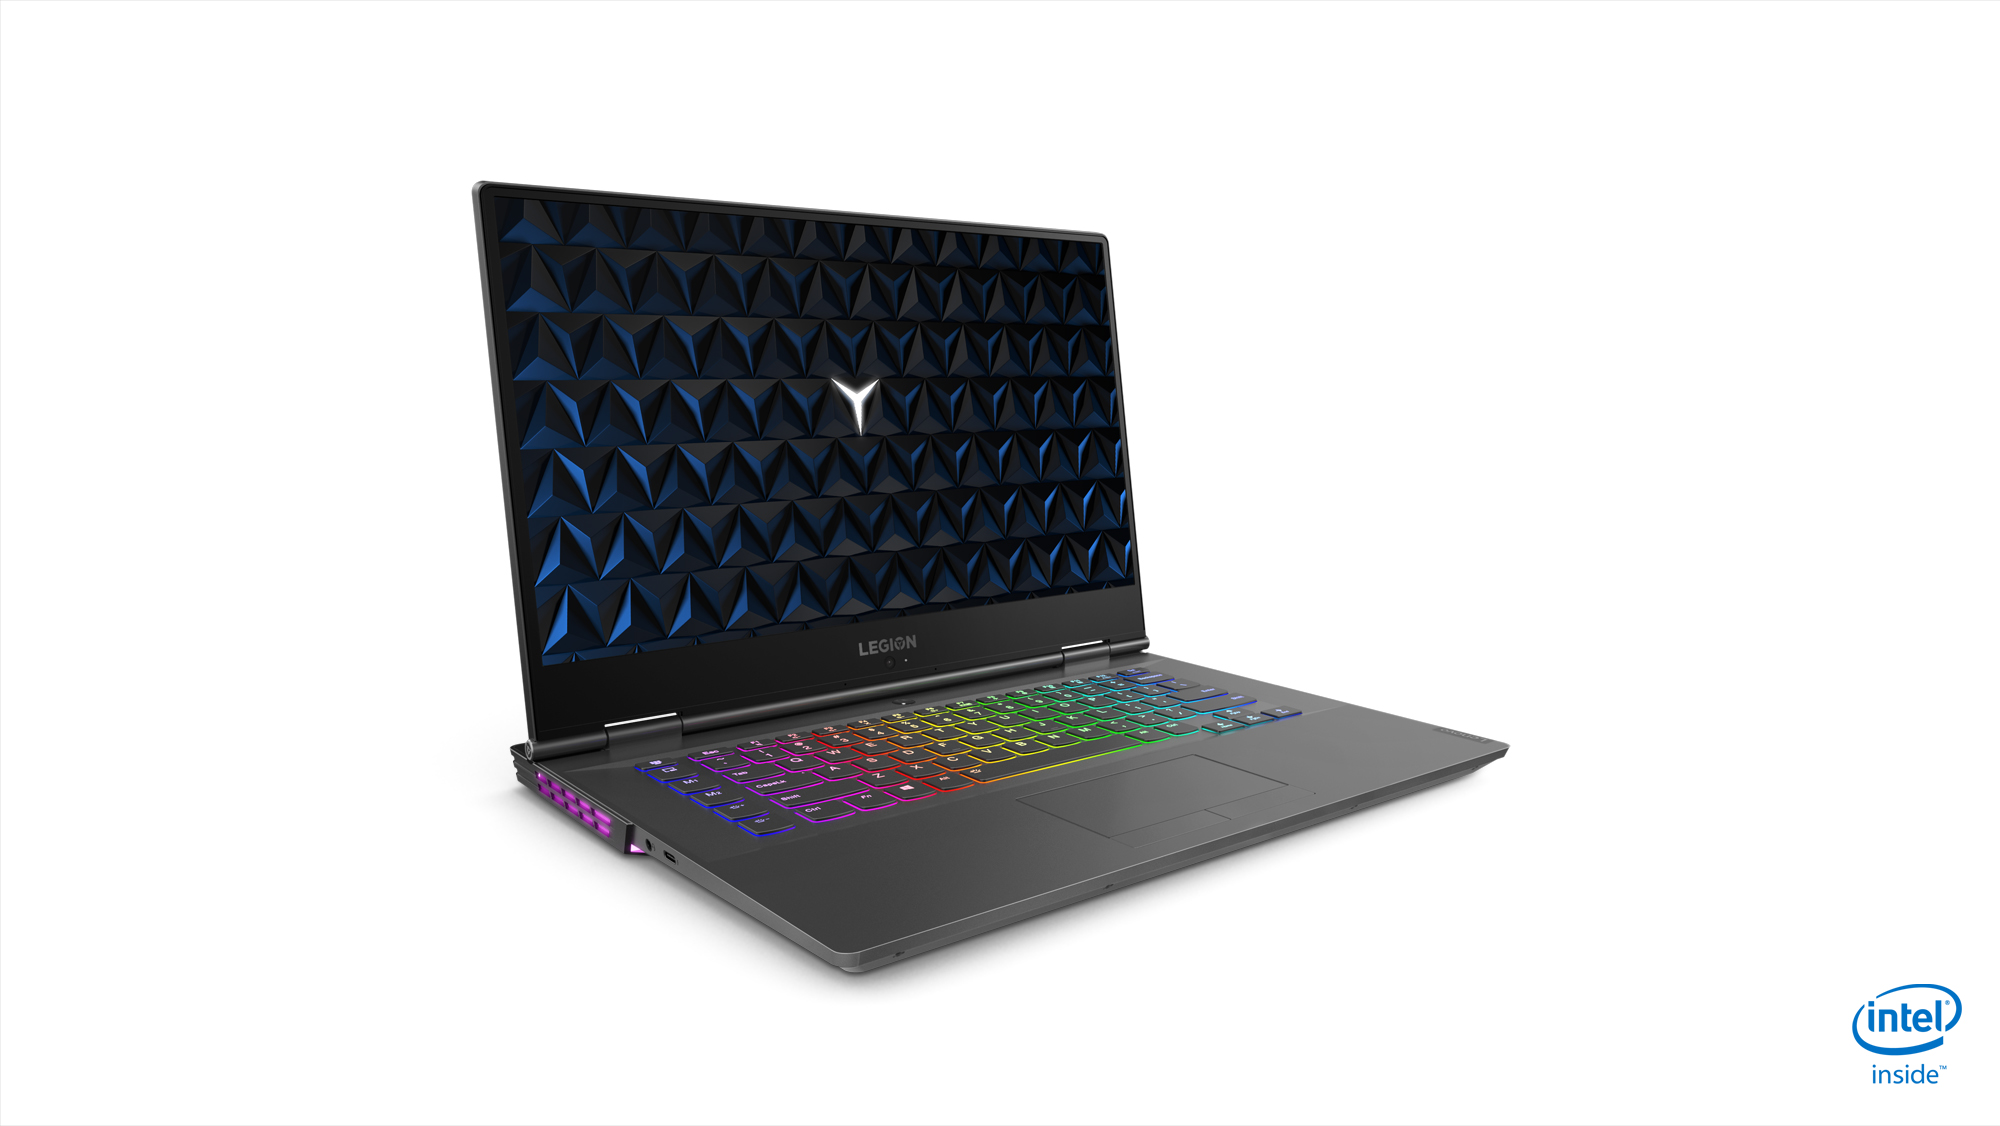 lenovo new legion gaming laptops ces 2019 02 y740 notebook 15inch hero front facing right